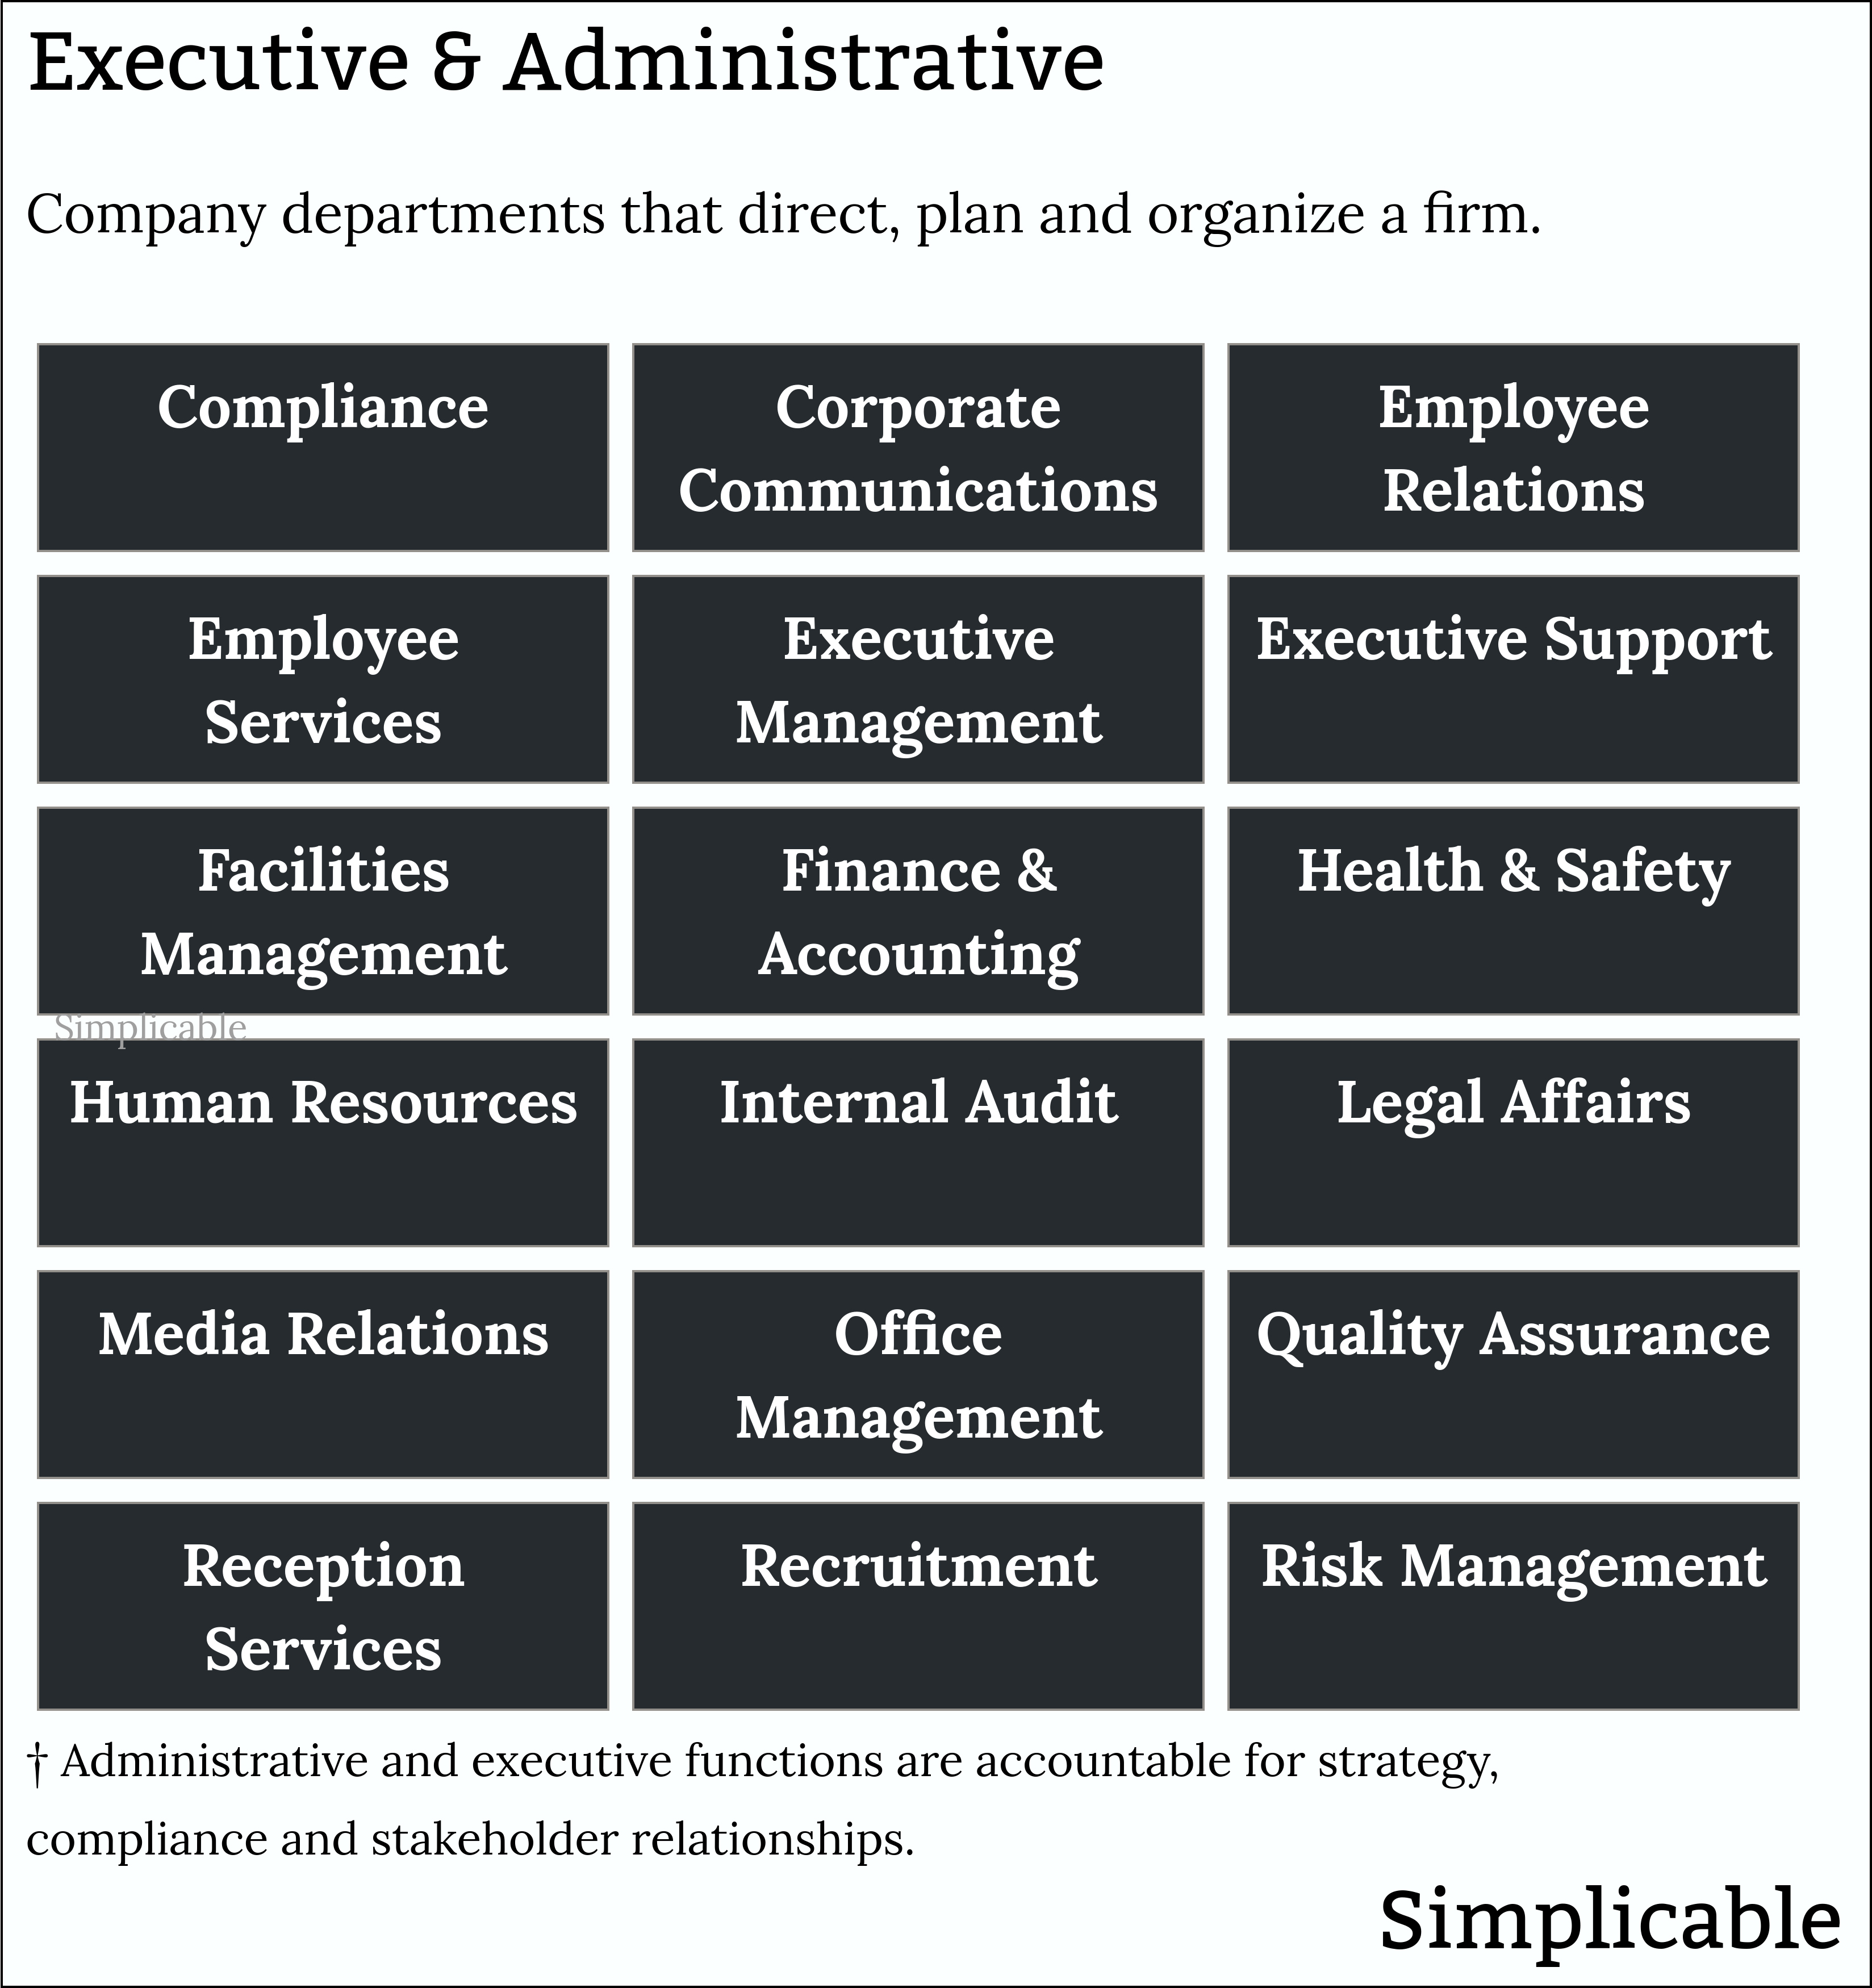 executive and administrative company departments